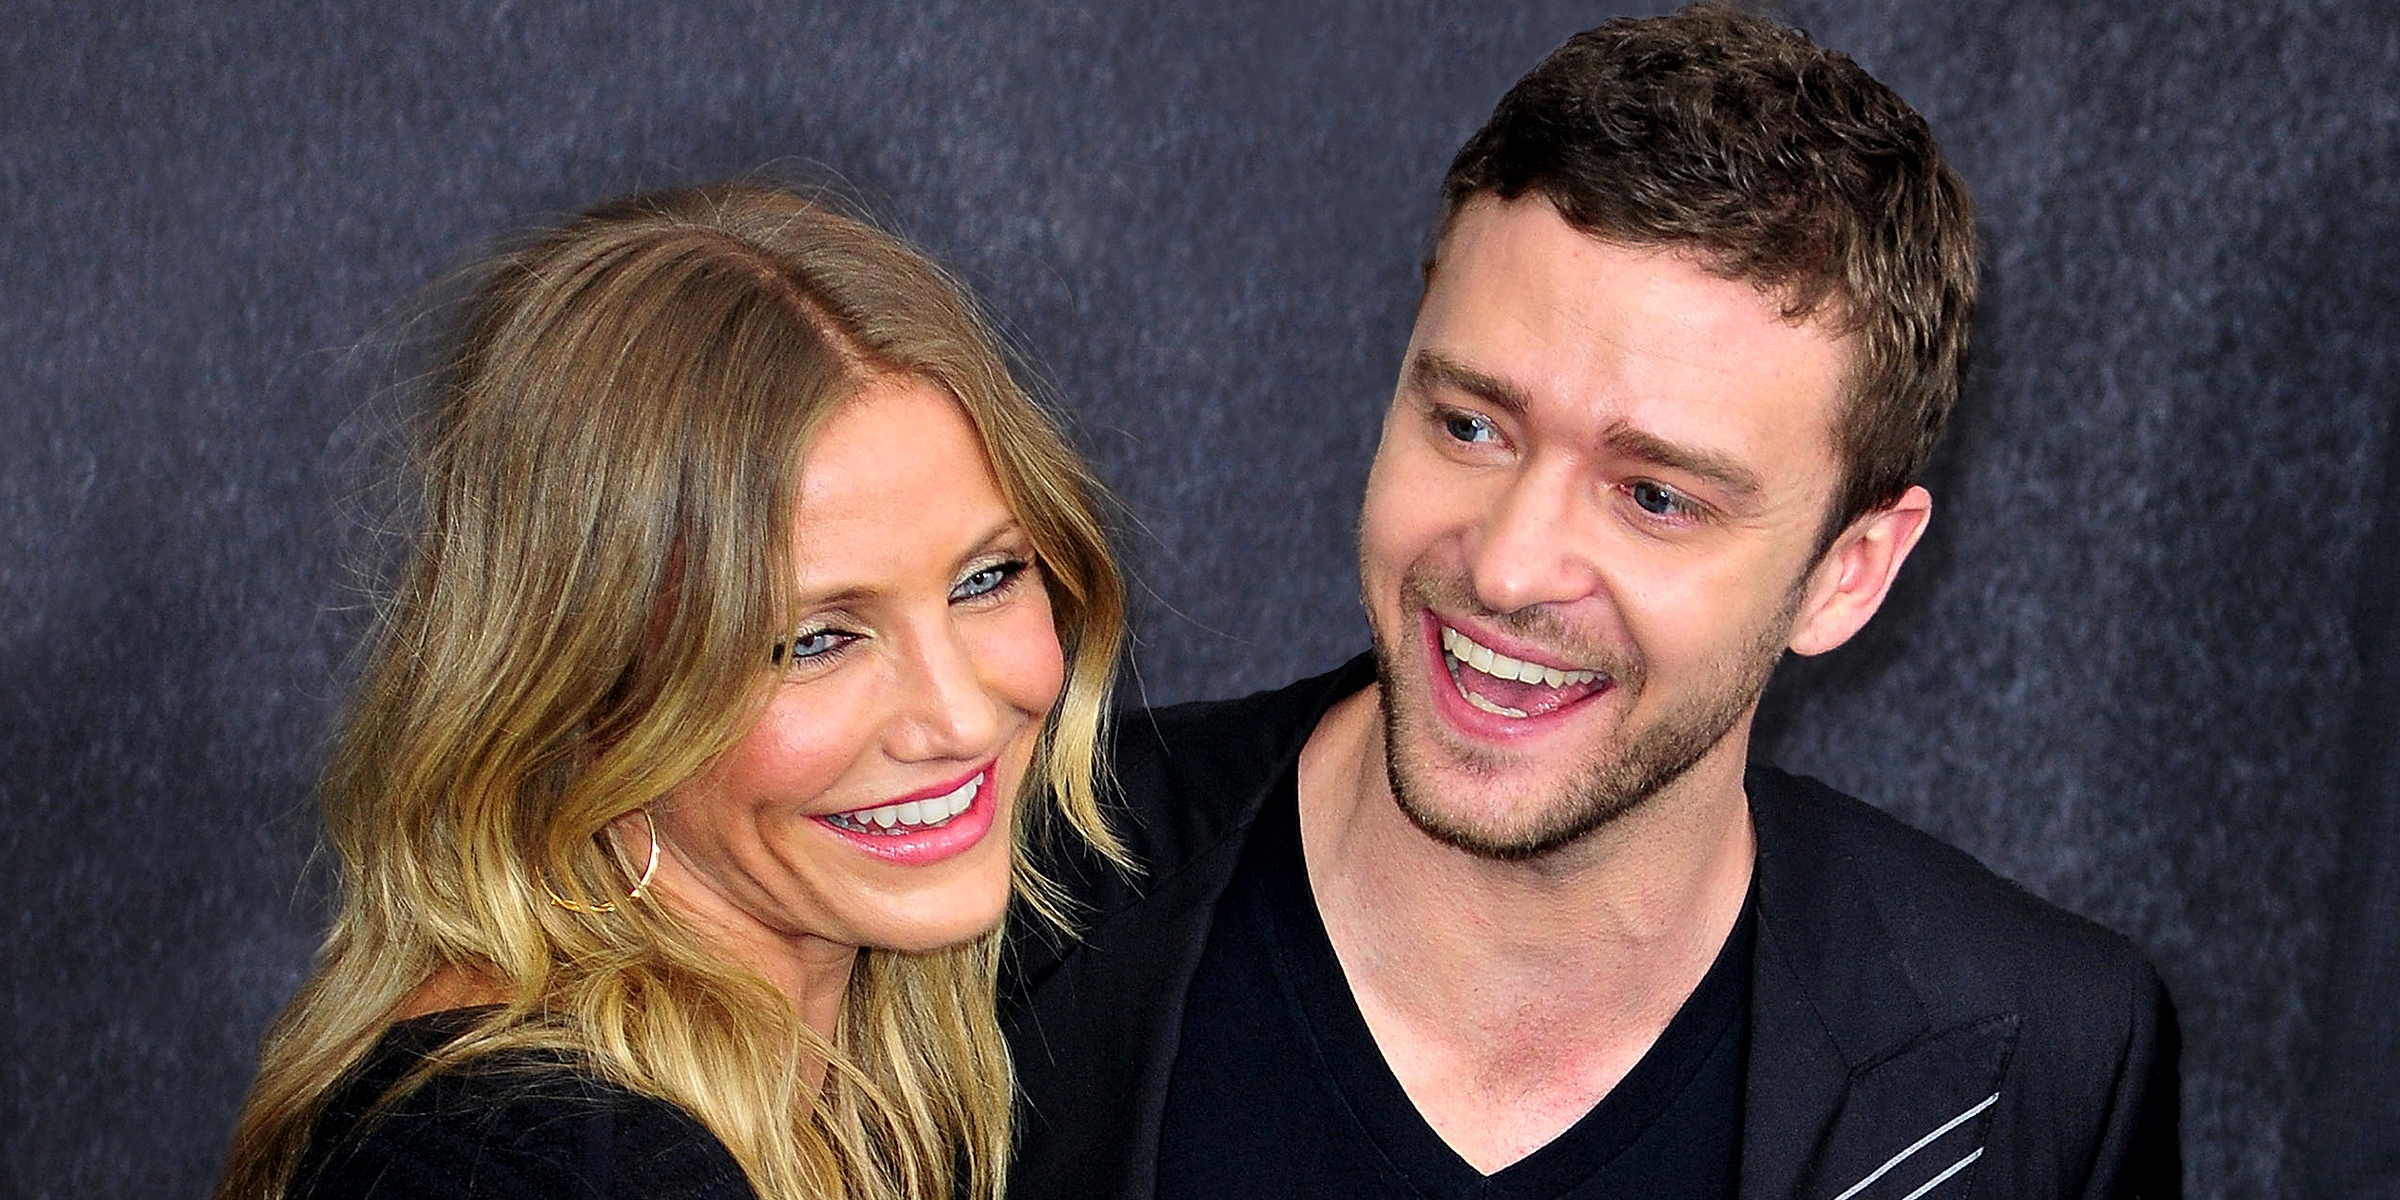 Cameron Diaz and Justin Timberlake | Source: Getty Images